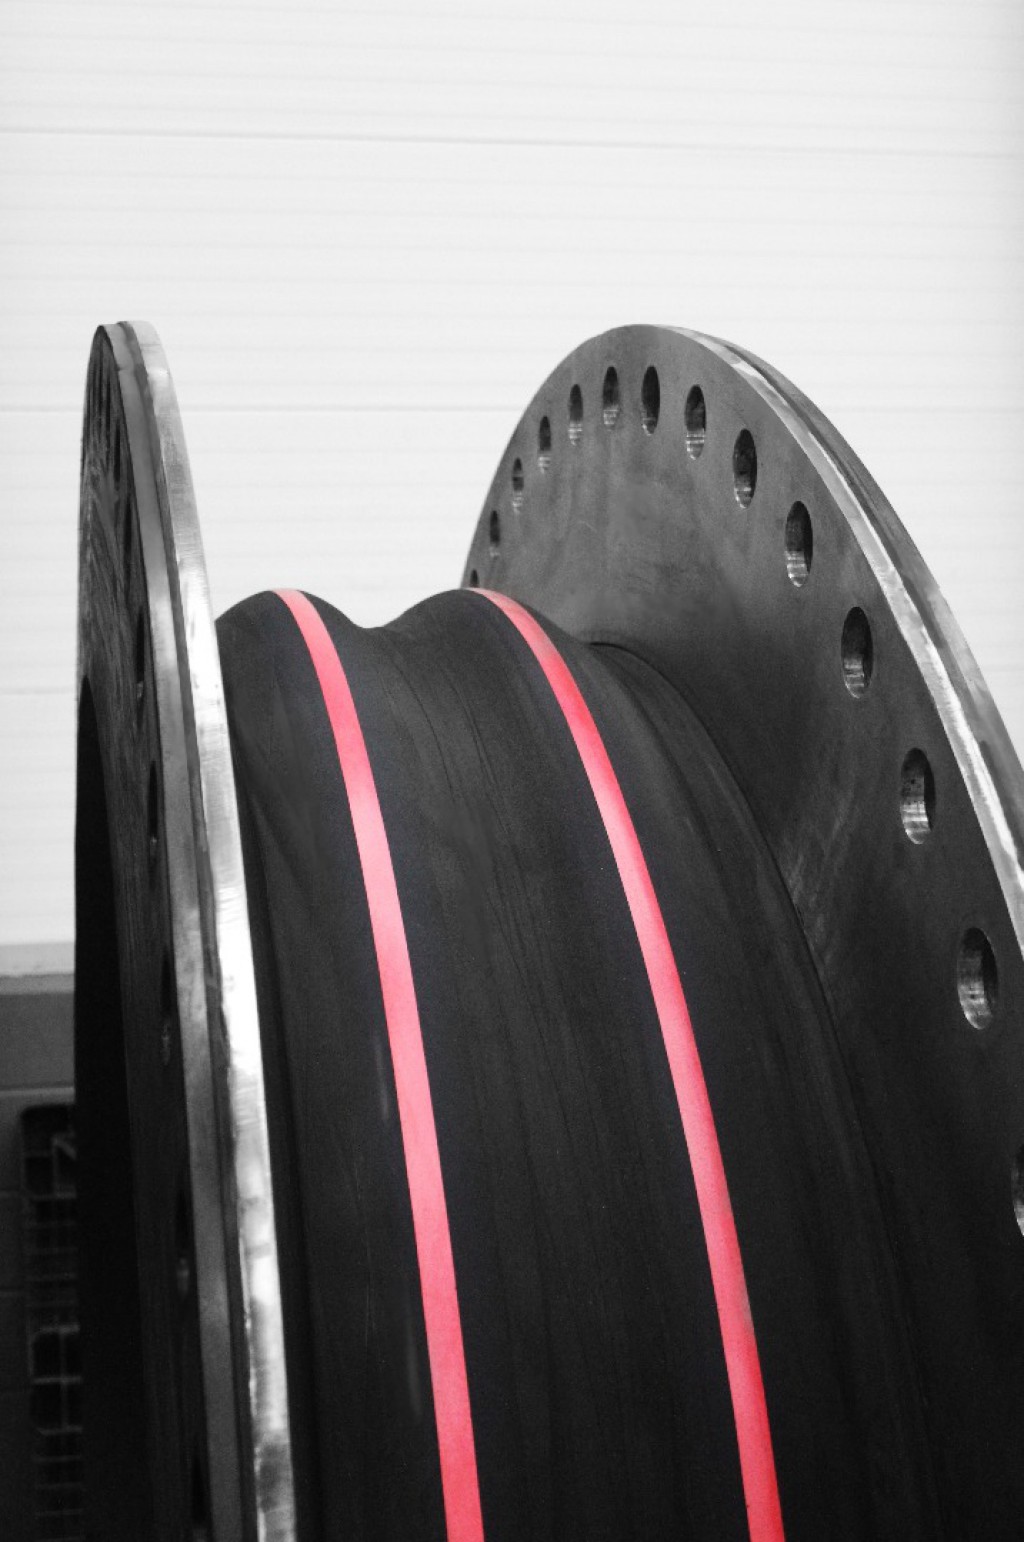 Rubber Expansion Joints for the Escondida Desalination Project, Chile